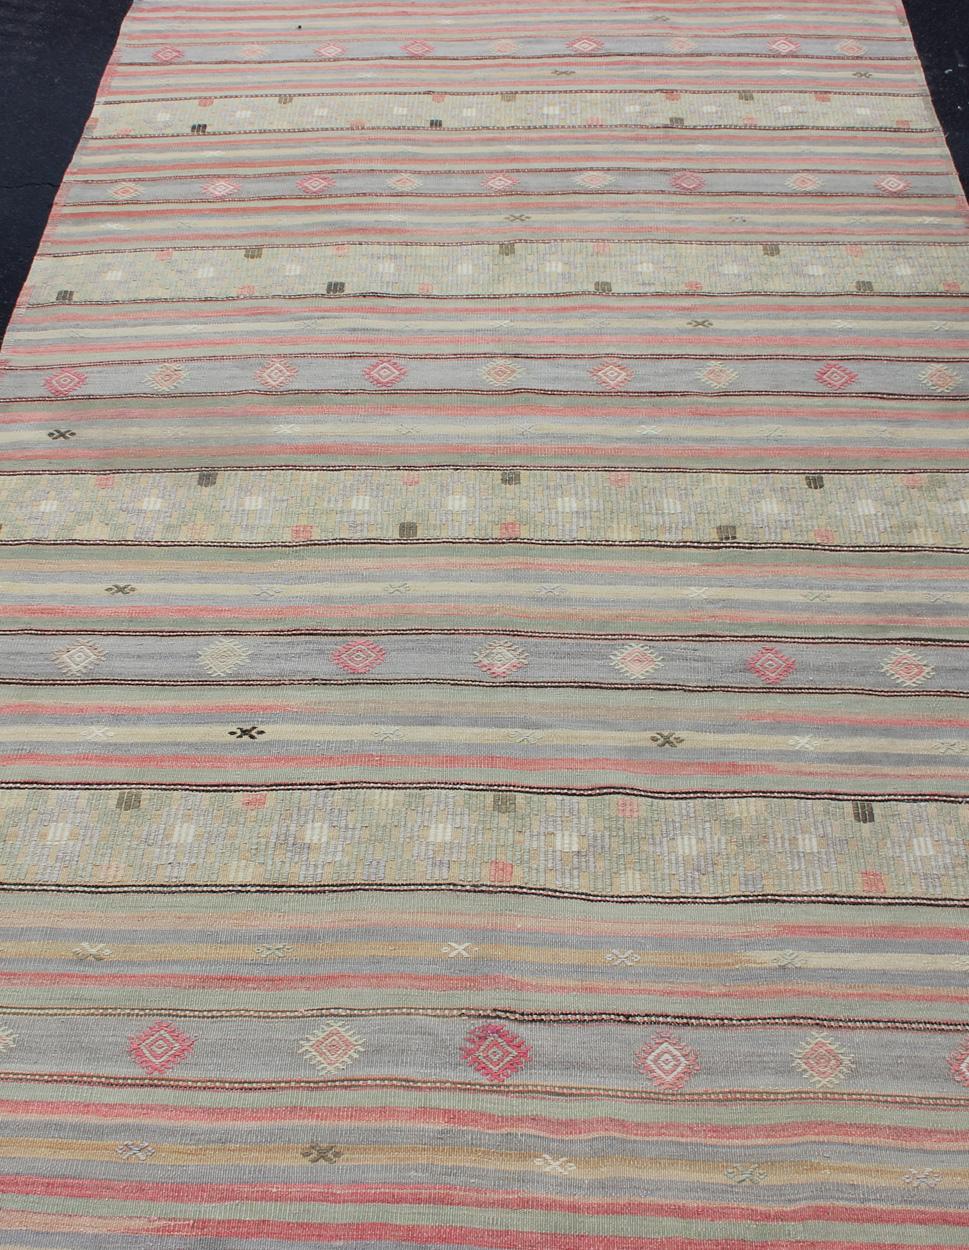 Colorful Vintage Turkish Embroidered Flatweave Rug with Striped Geometric Design In Excellent Condition For Sale In Atlanta, GA